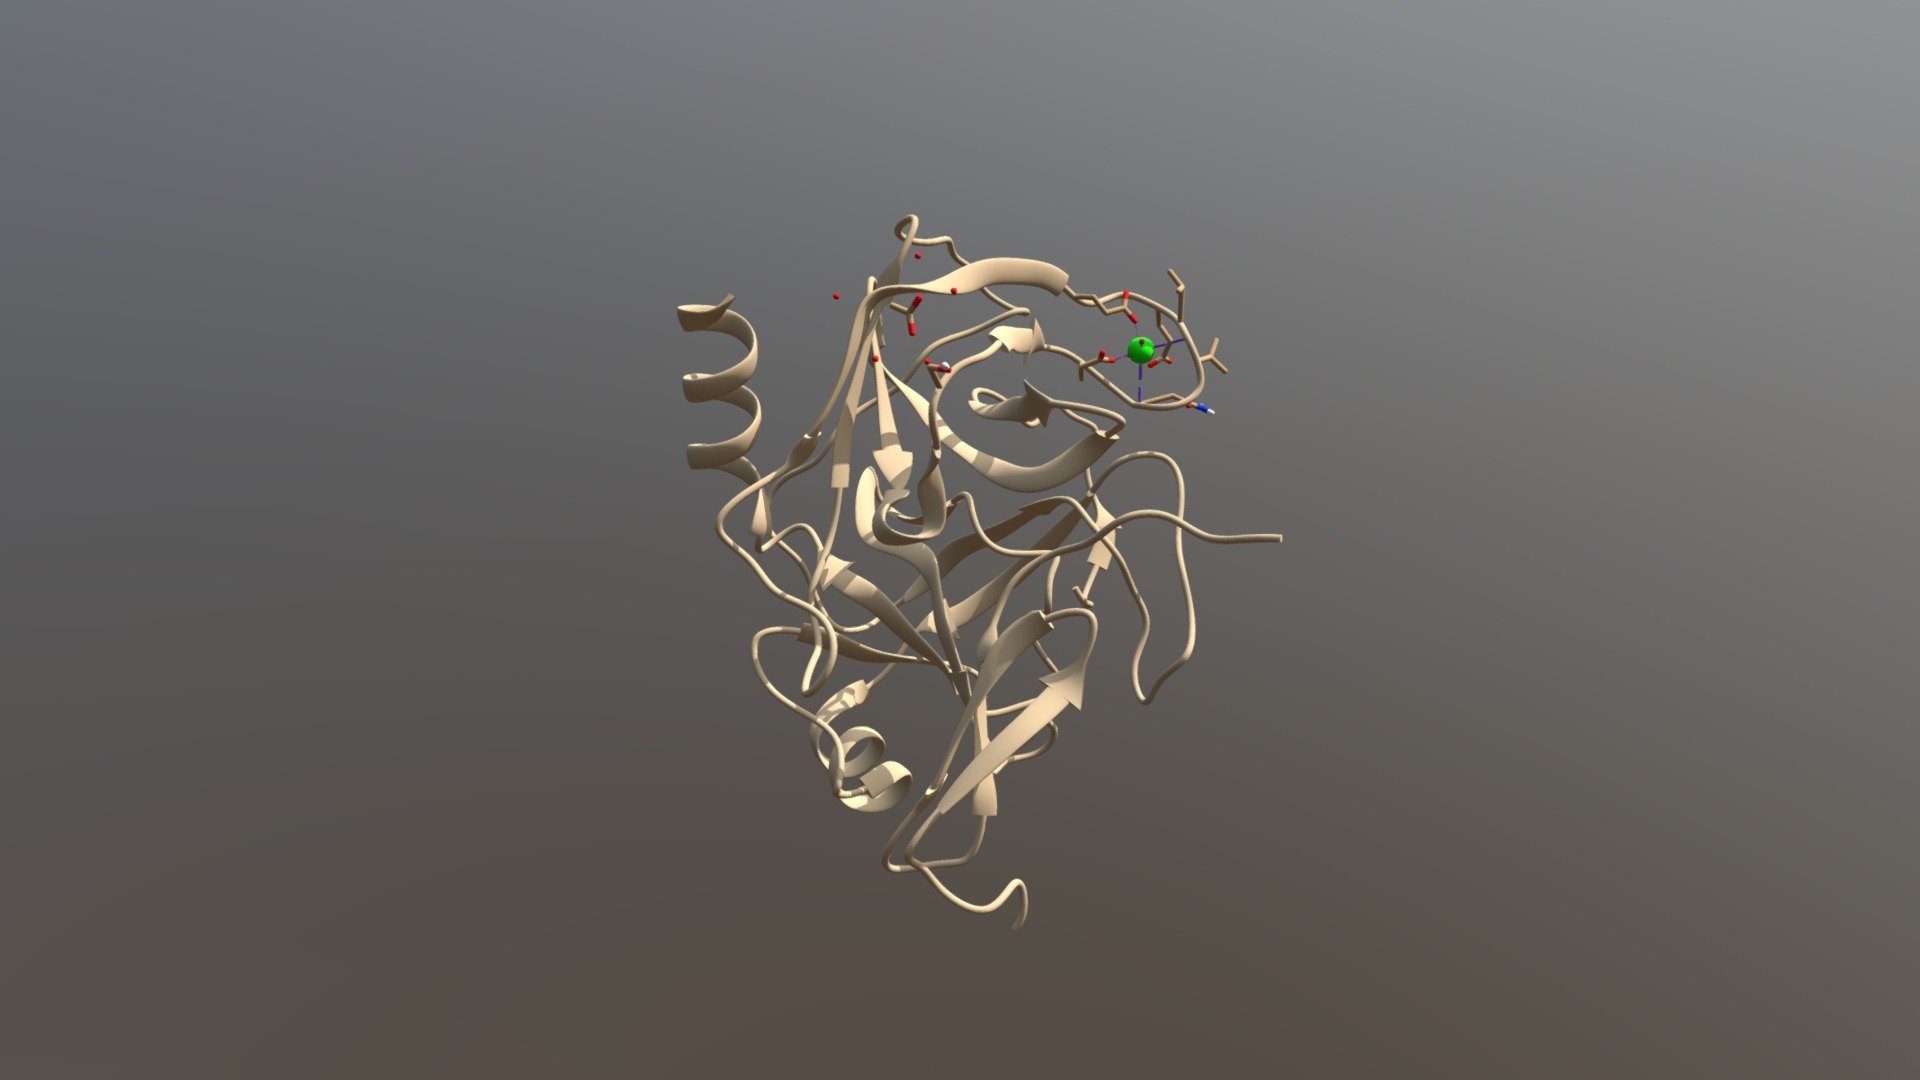 Based on PDB entry 2XTT. Bovine trypsin is a serine protease that cleaves next to positively charged amino acid side chains. SGPI-P02 is a modified serine protease inhibitor isolated from a desert locust 3d model